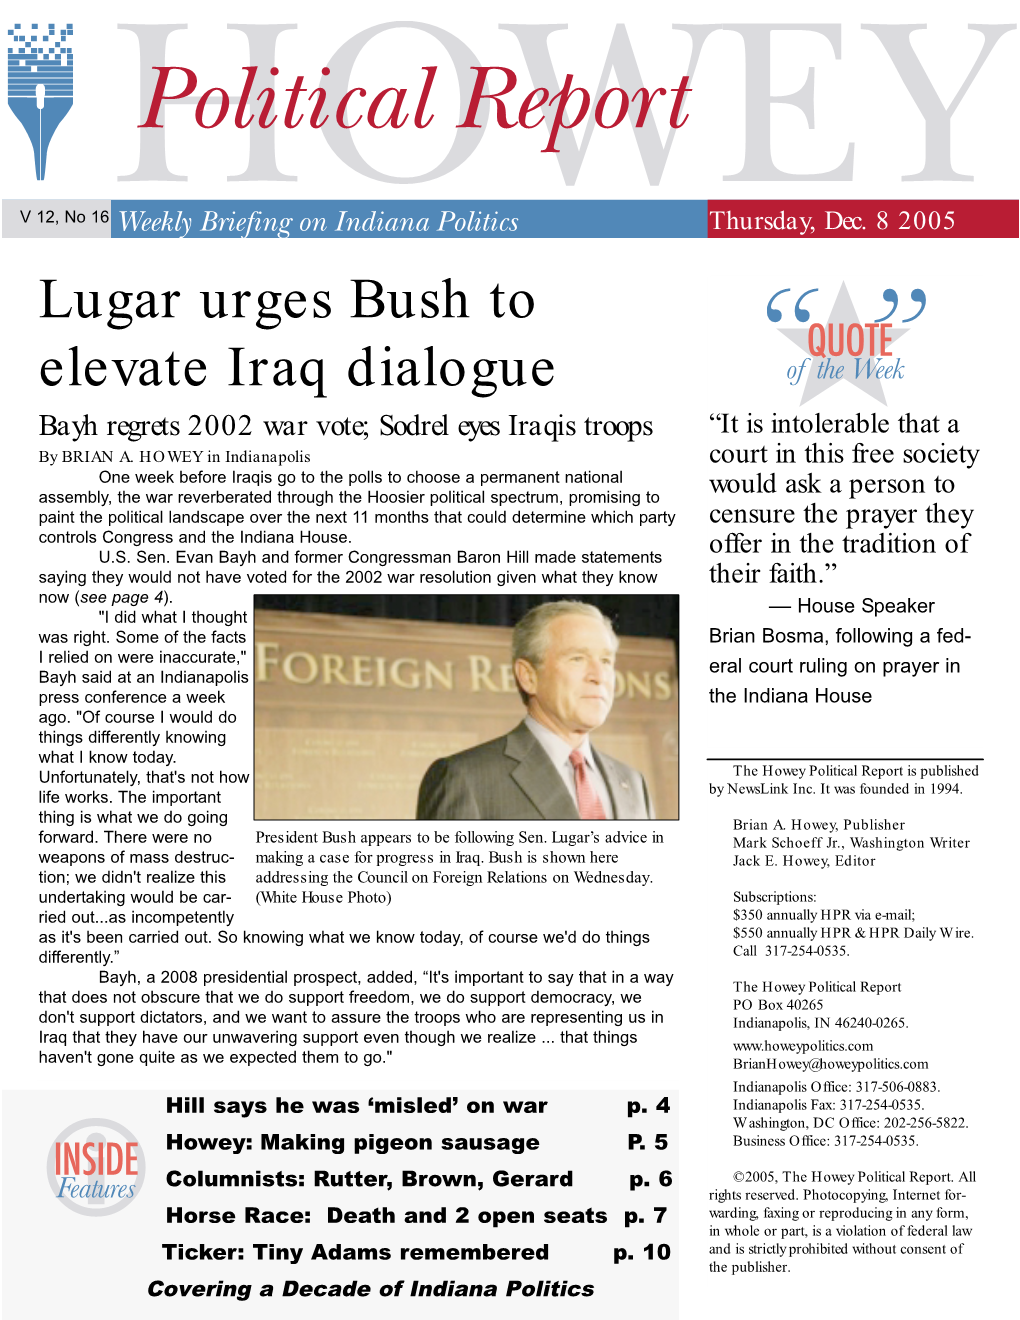 Lugar Urges Bush to Elevate Iraq Dialogue Bayh Regrets 2002 War Vote; Sodrel Eyes Iraqis Troops “It Is Intolerable That a by BRIAN A